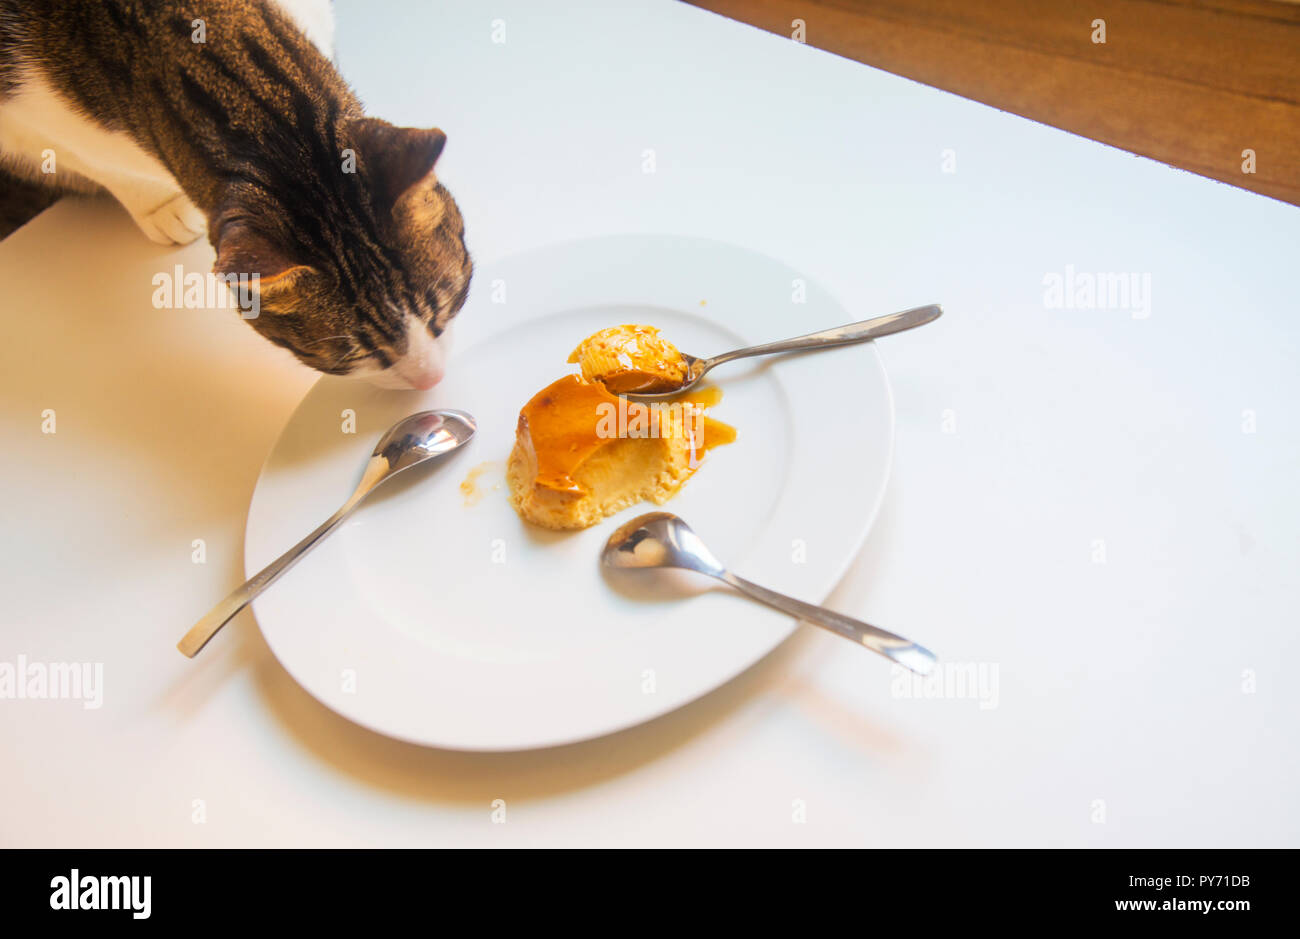 Tabby and white cat sniffing a dish with creme caramel. Stock Photo